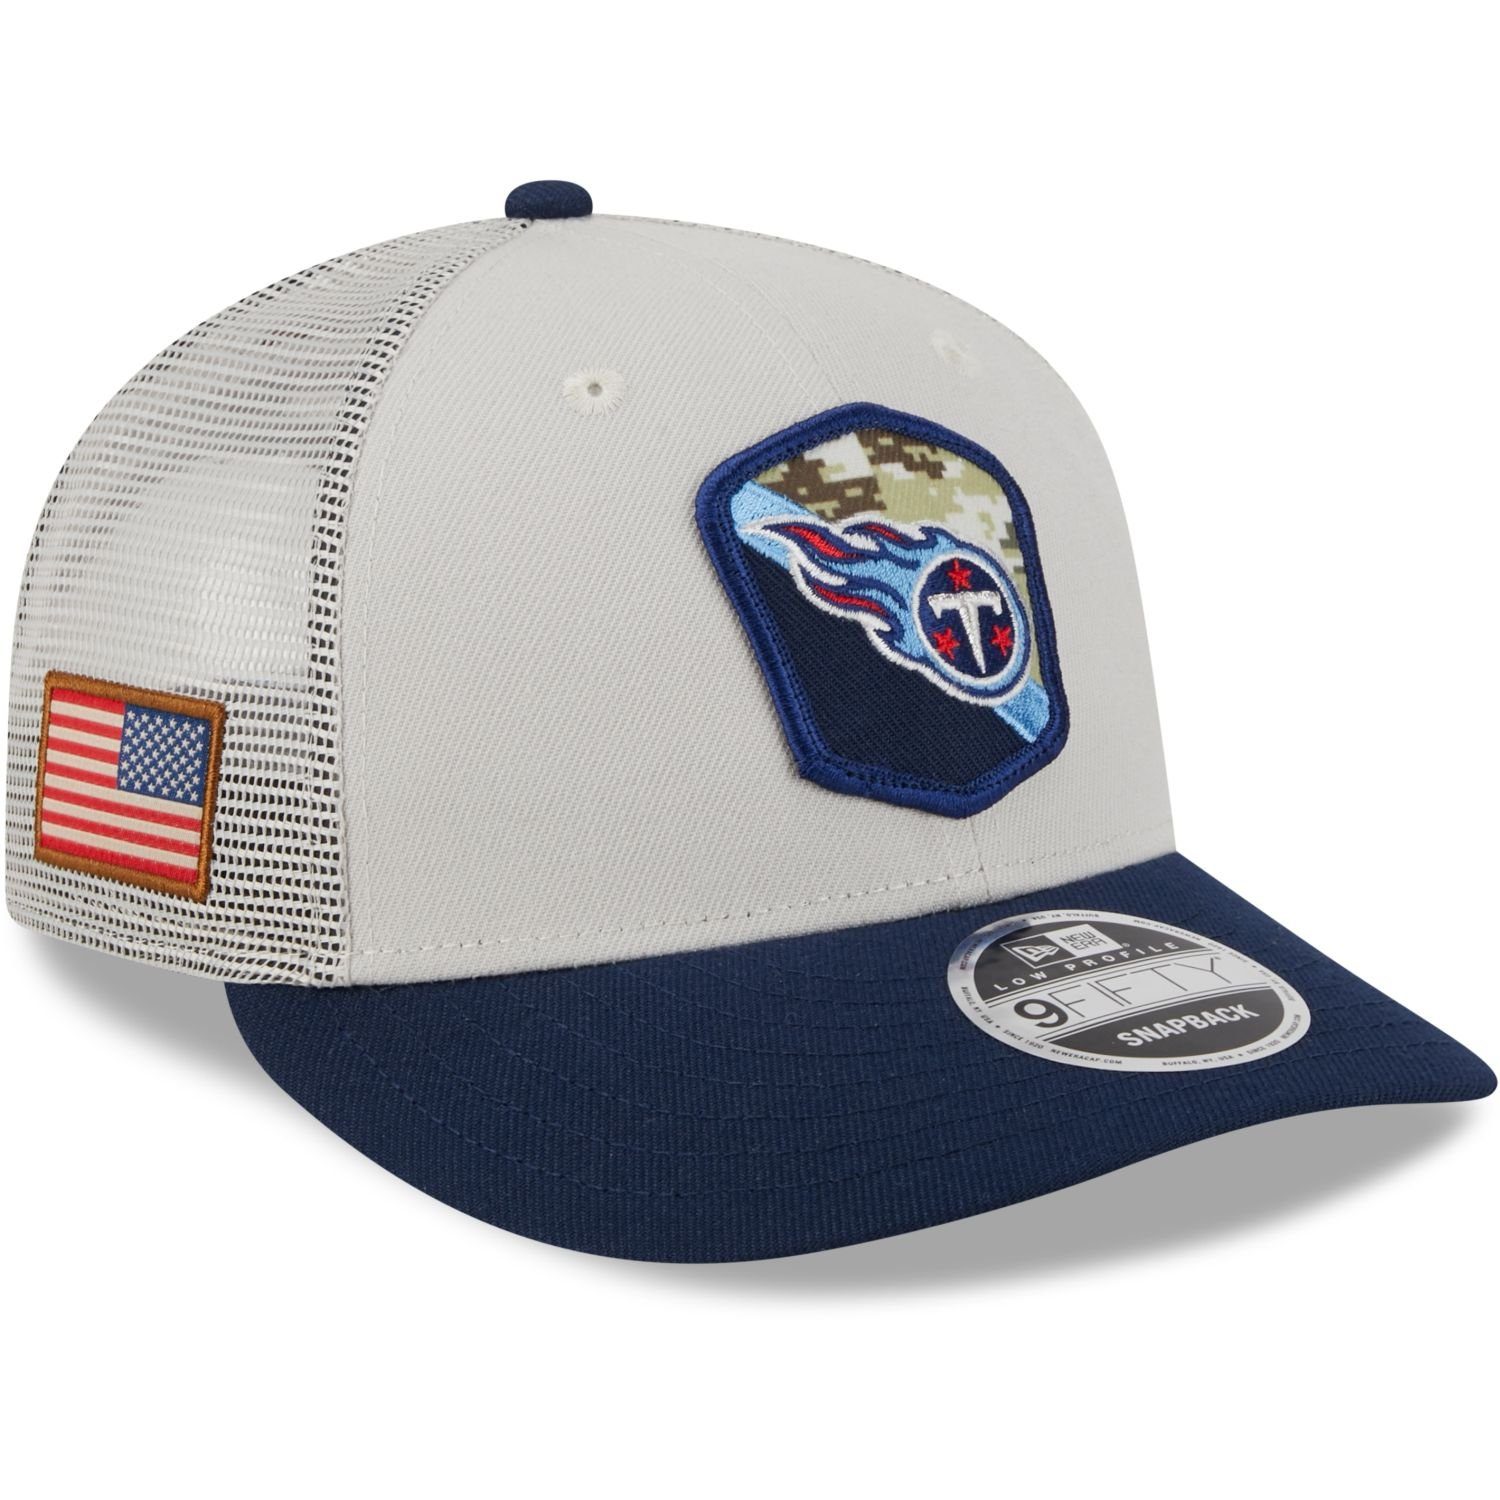 New Era Snapback Cap 9Fifty Low Profile Snap NFL Salute to Service Tennessee Titans